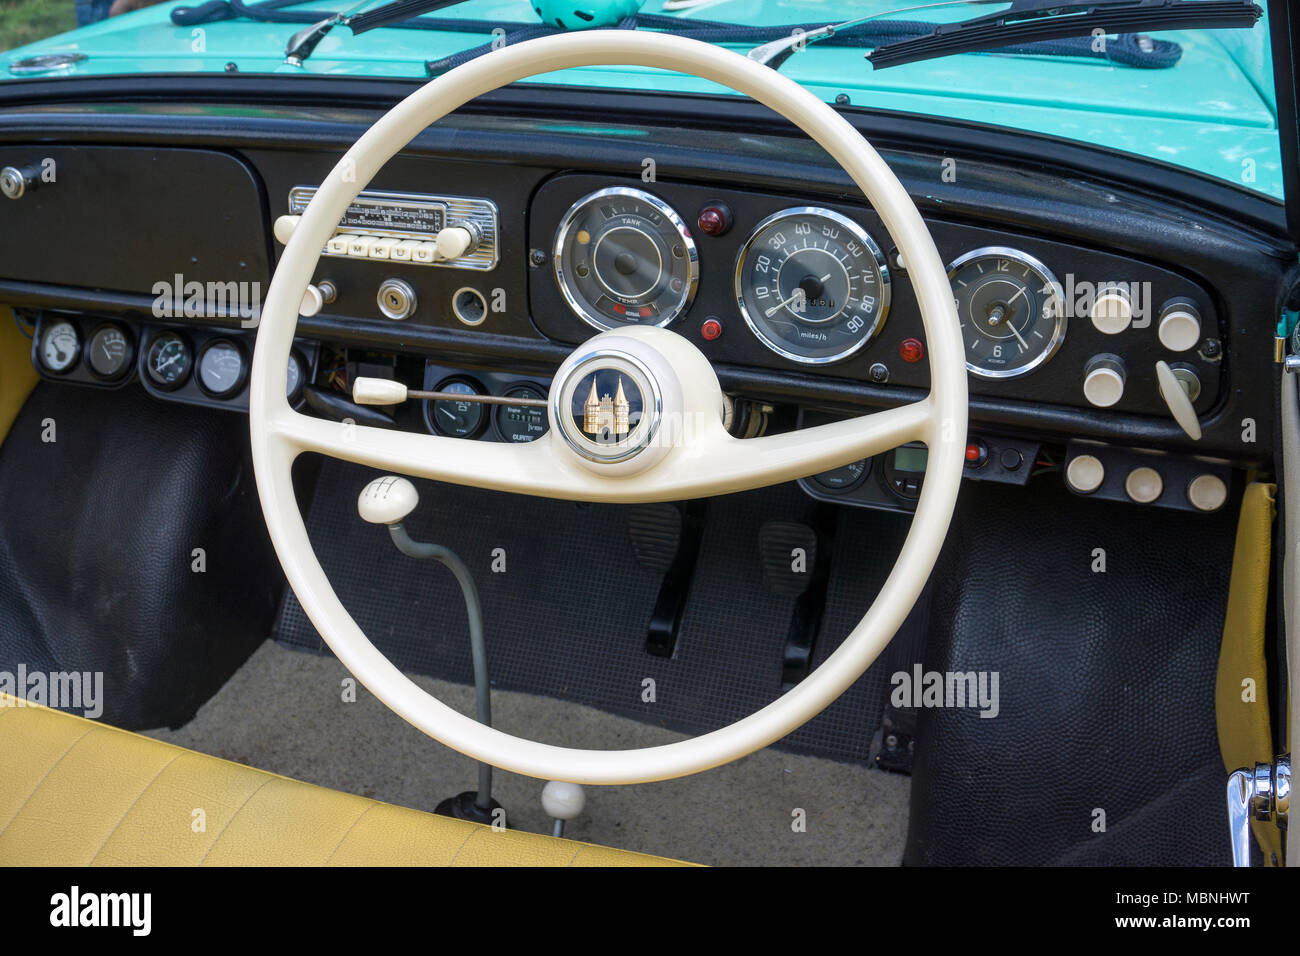 Steering wheel and car dashboard of a Amphicar, amphibious vehicle exhibition at Moselle river, Neumagen-Dhron, Rhineland-Palatinate, Germany Stock Photo